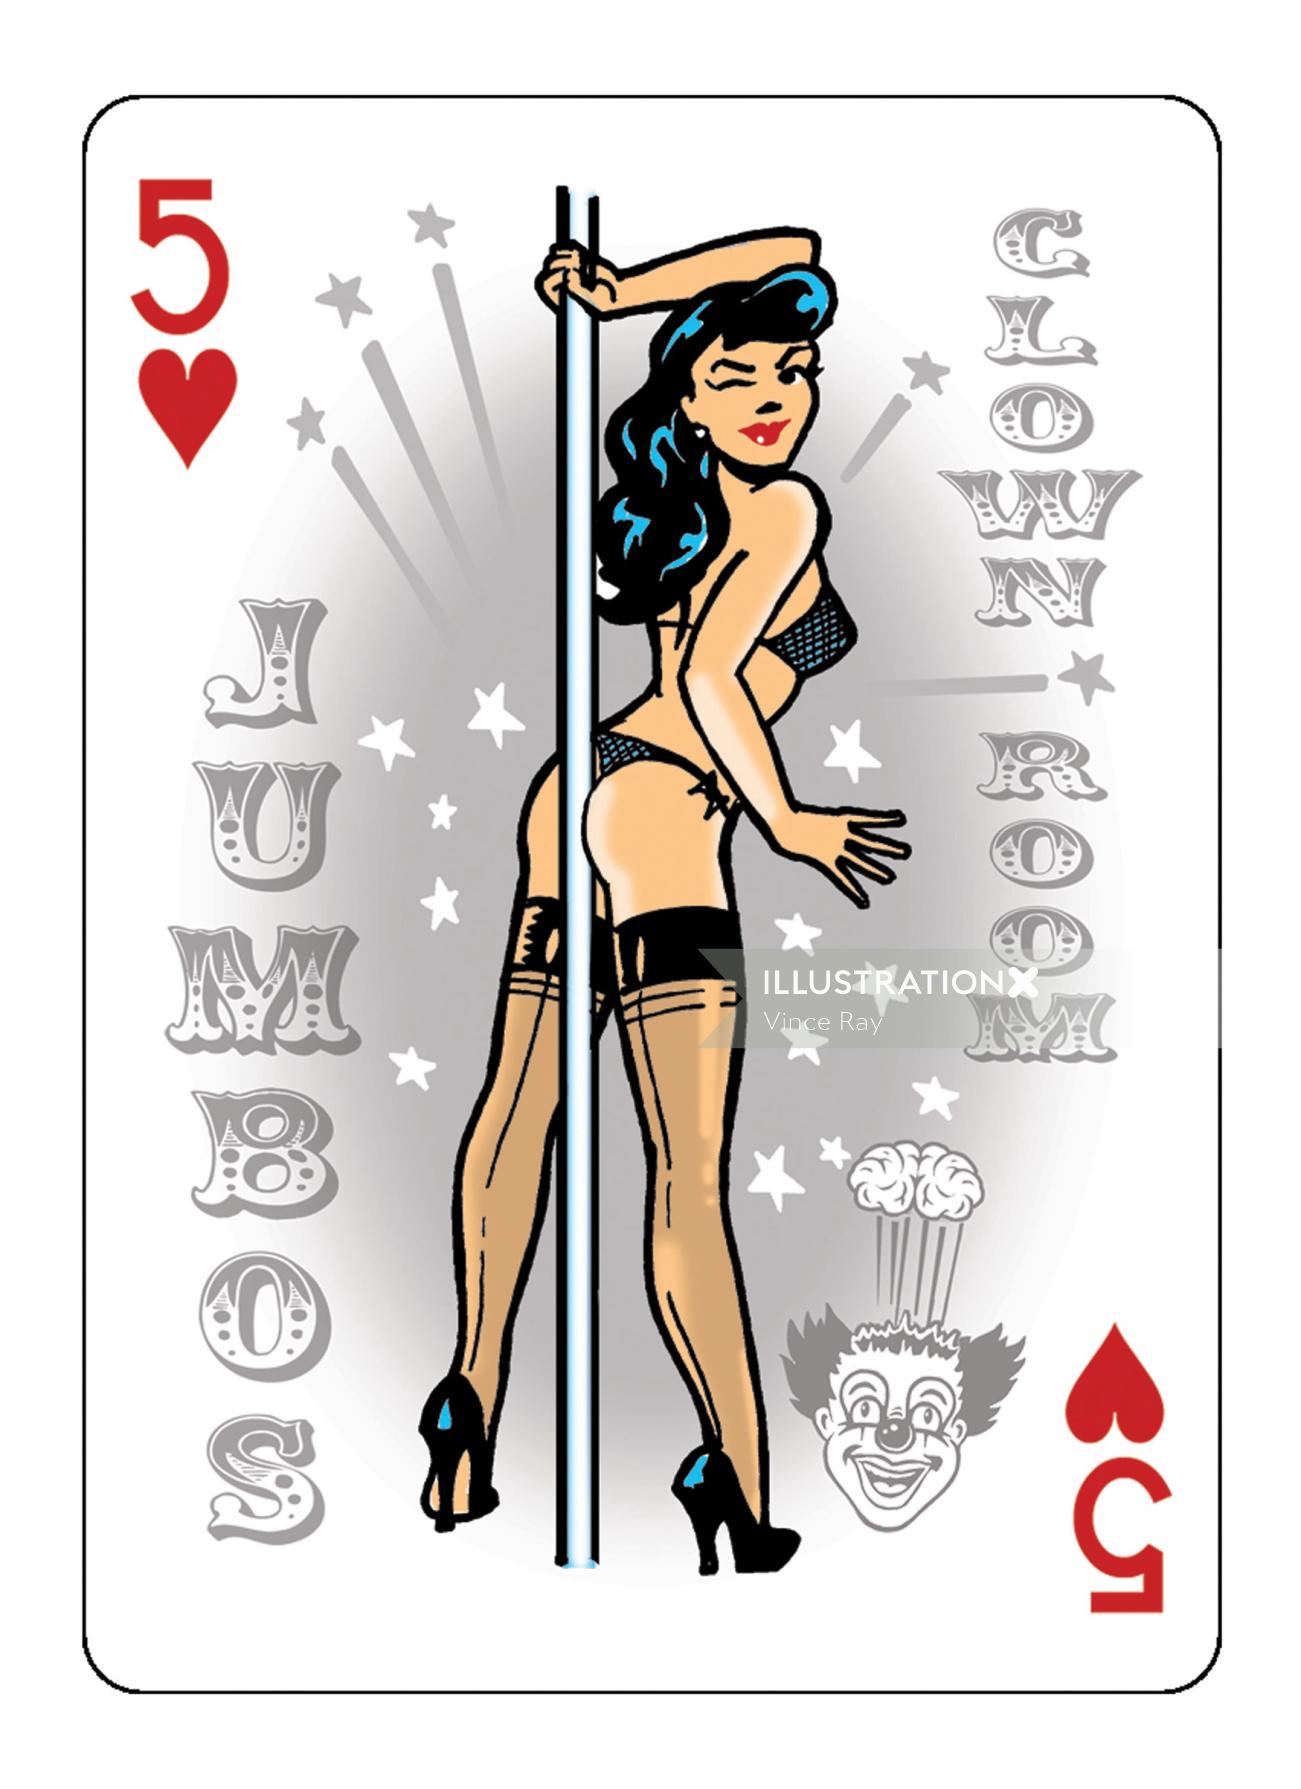 Lingerie Woman on playing cards
